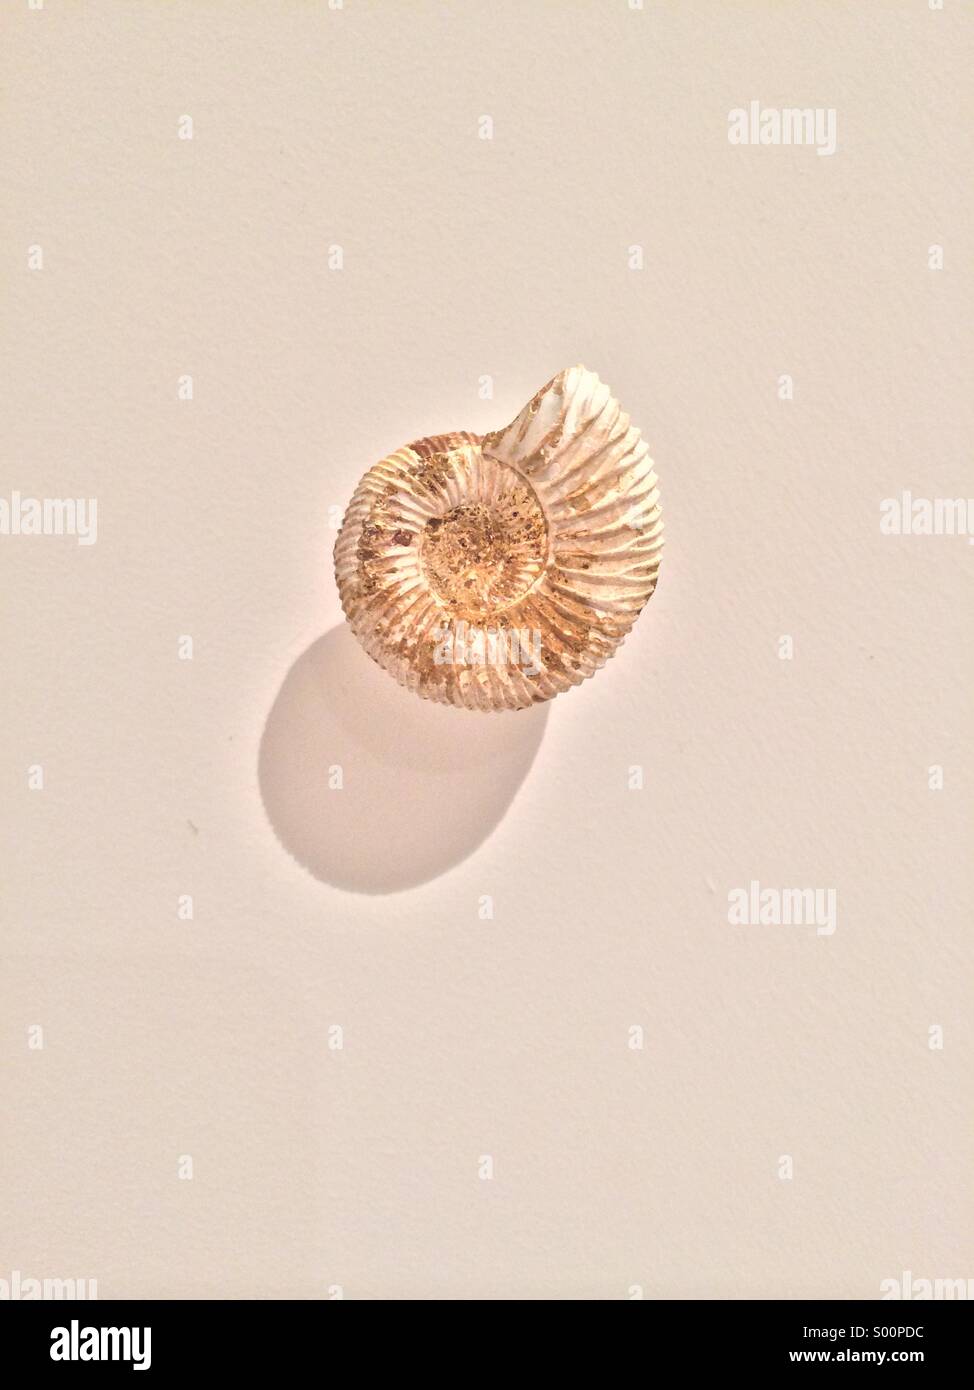 Ammonite fossile. Banque D'Images